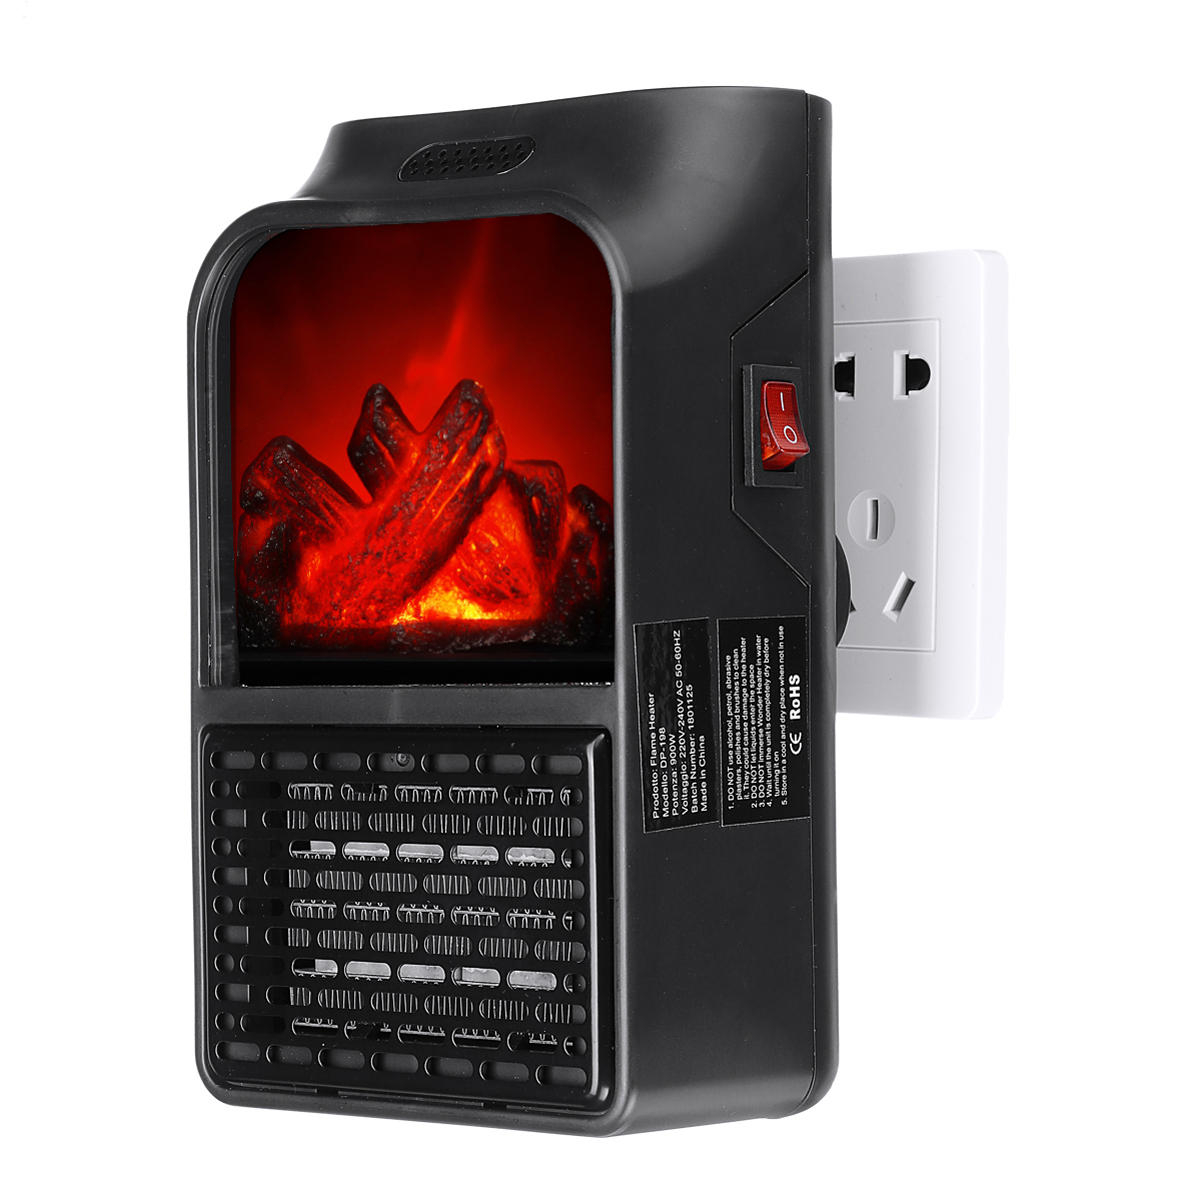 900w Mini Portable Electric Heater Fan Air Warmer Fireplace Flame Heater Remote Control pertaining to size 1200 X 1200